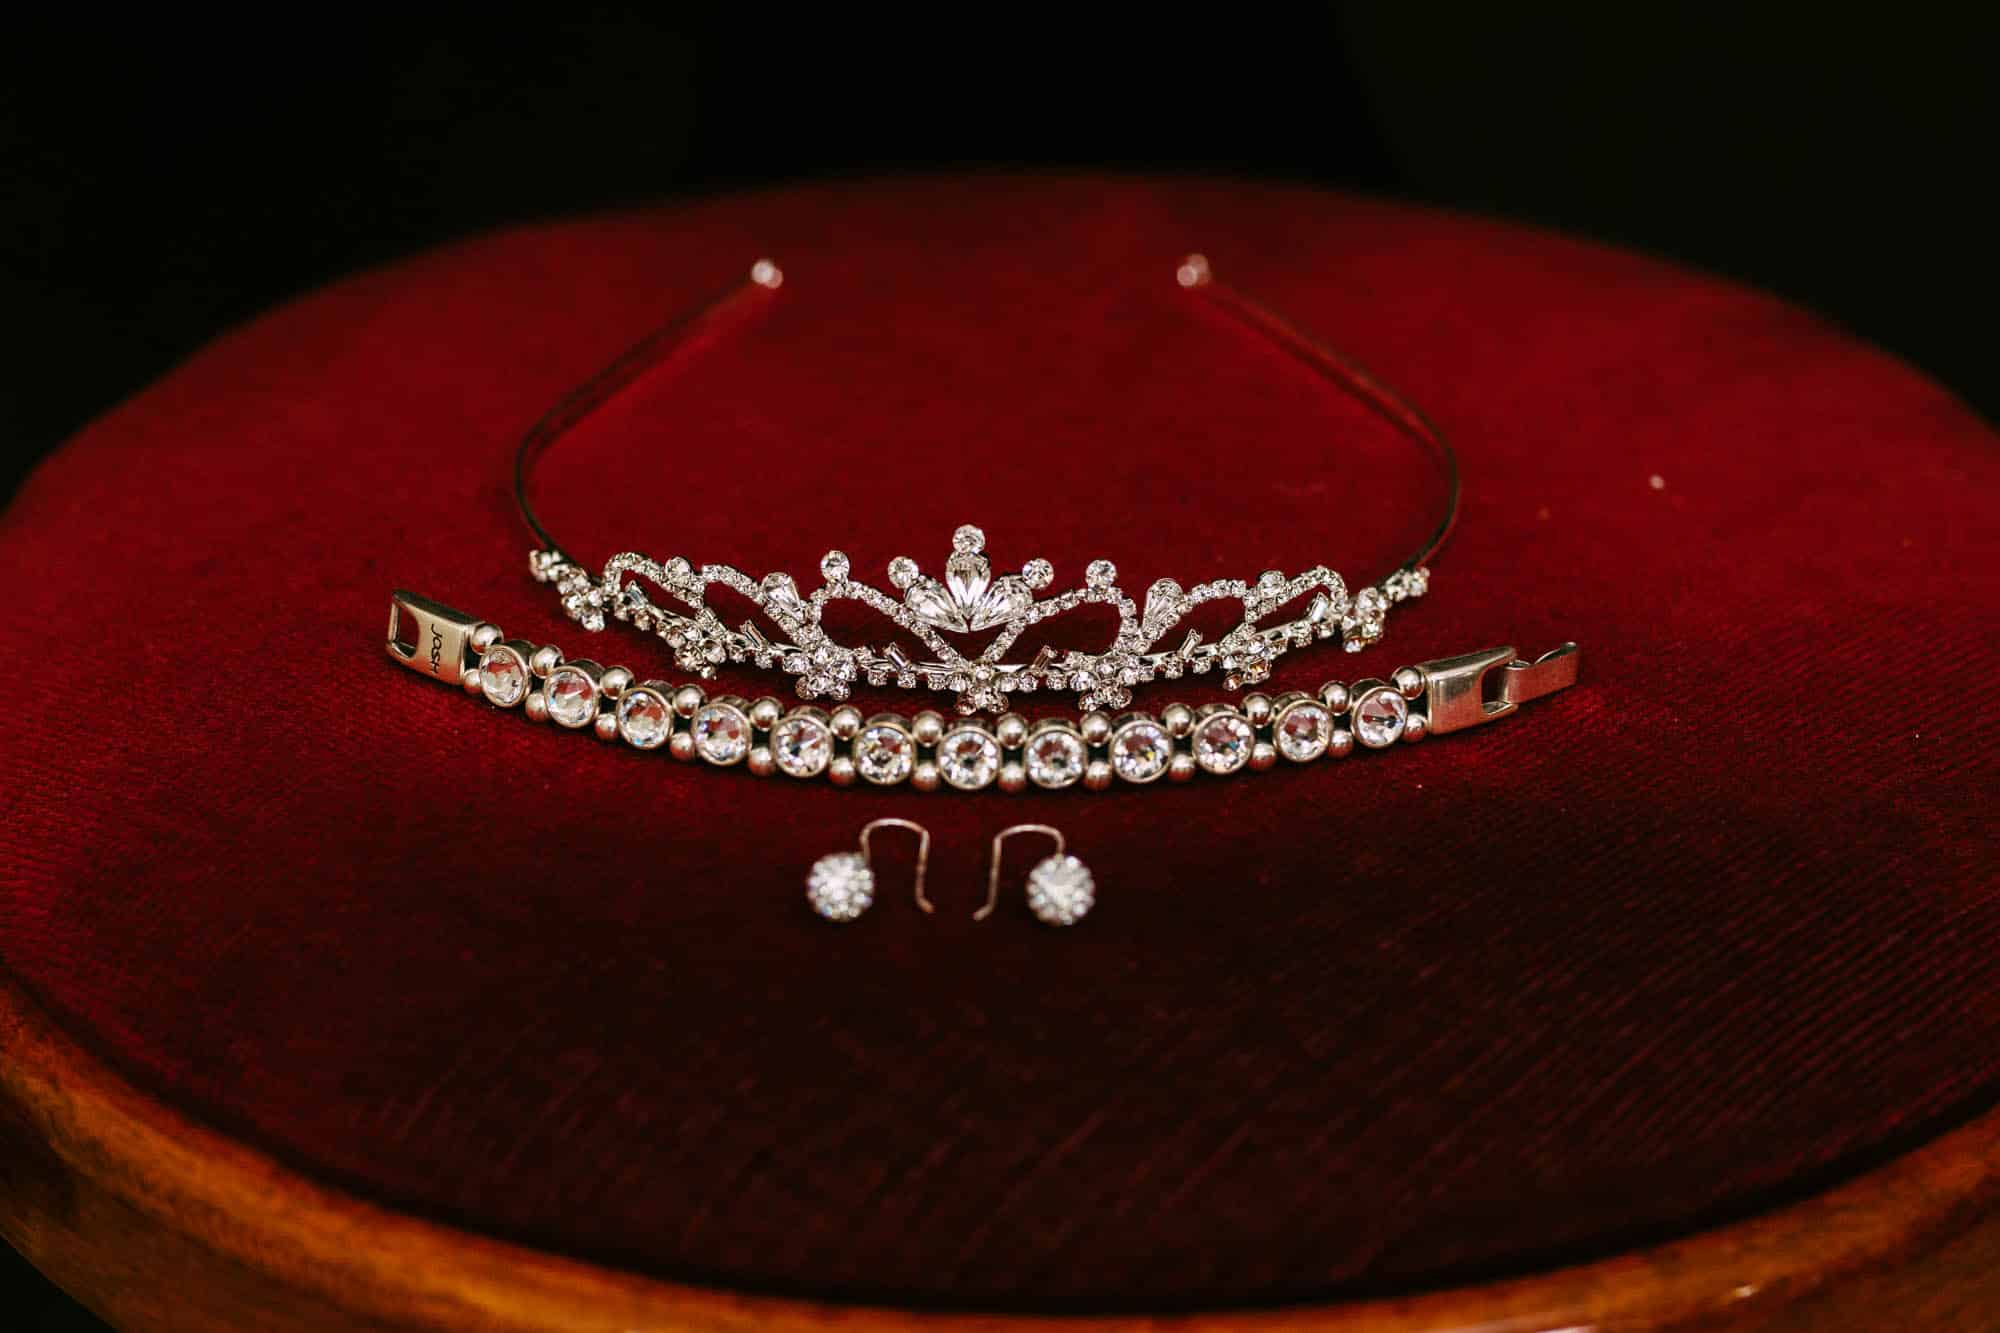 A tiara and earrings on a red table, perfect for bridal hairstyles.